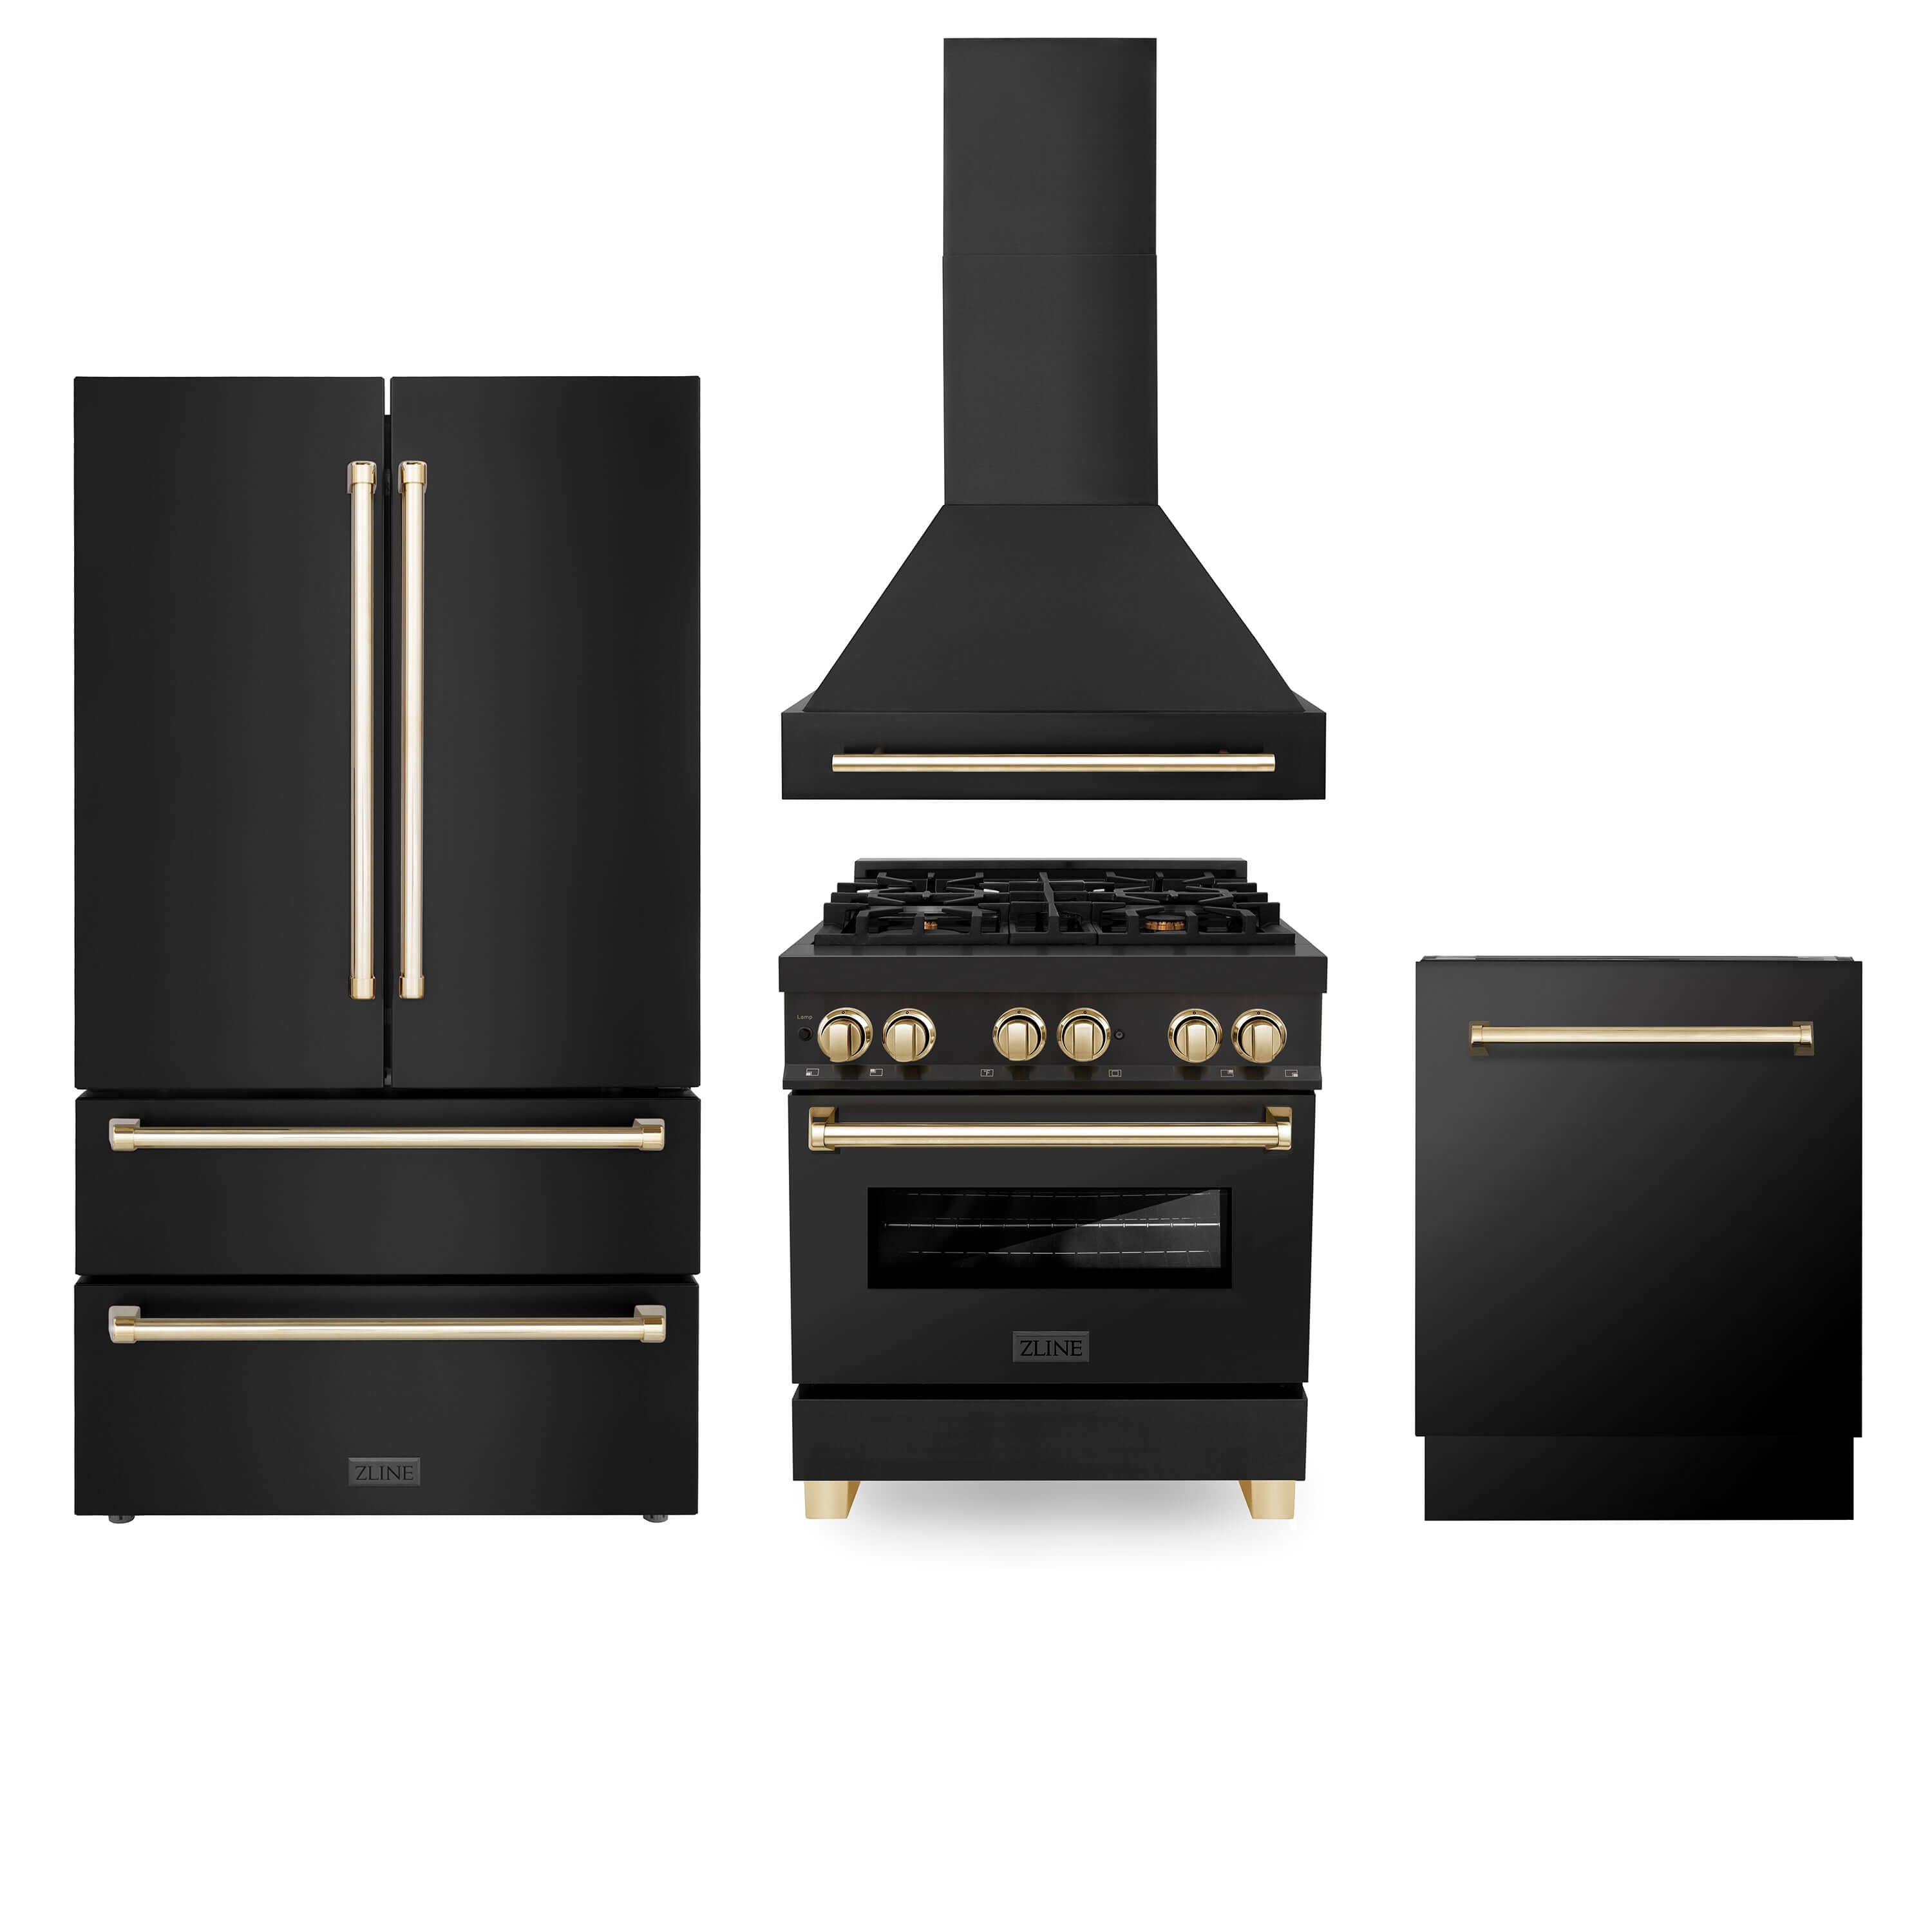 ZLINE 4-Piece Autograph Edition Black Stainless Steel Kitchen Package with Range, Range Hood, Dishwasher, and French Door Refrigerator with matching Polished Gold accents.